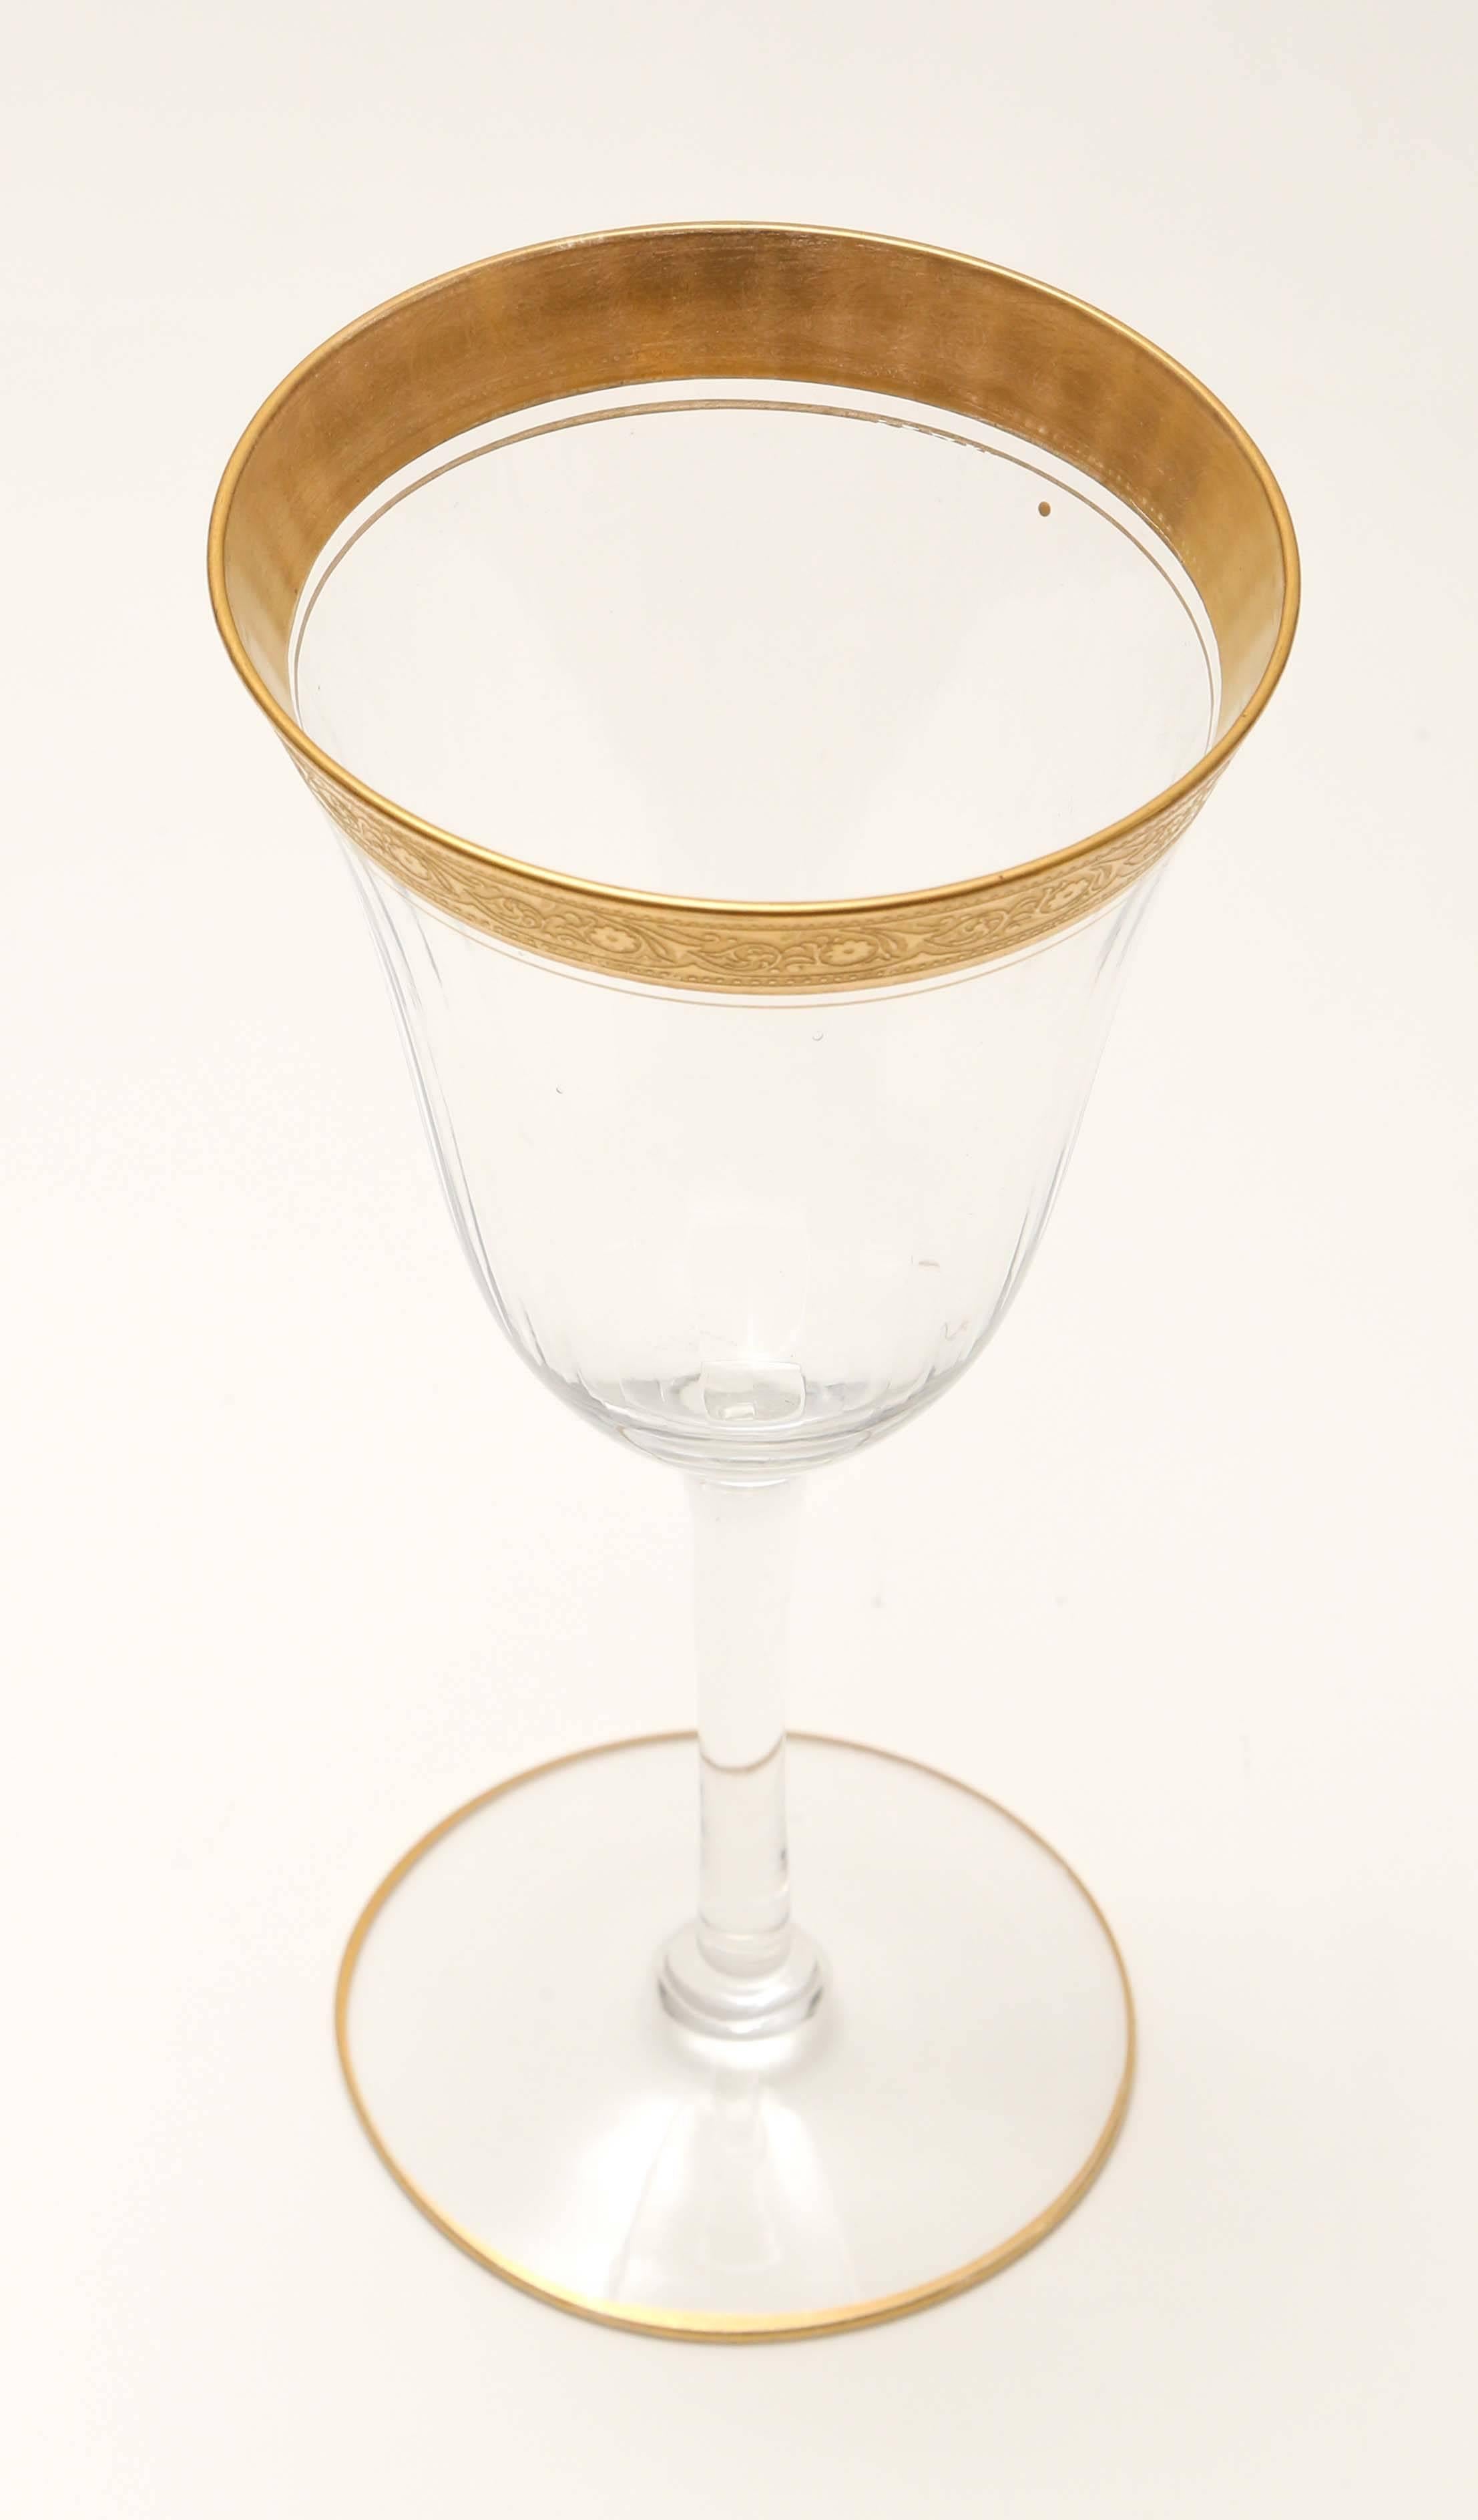 A great and basic goblet to mix and match in with all your fine china and crystal. Please note that this is for a set of 12 goblets, but we have more available as we find them so practical. Kindly inquire.